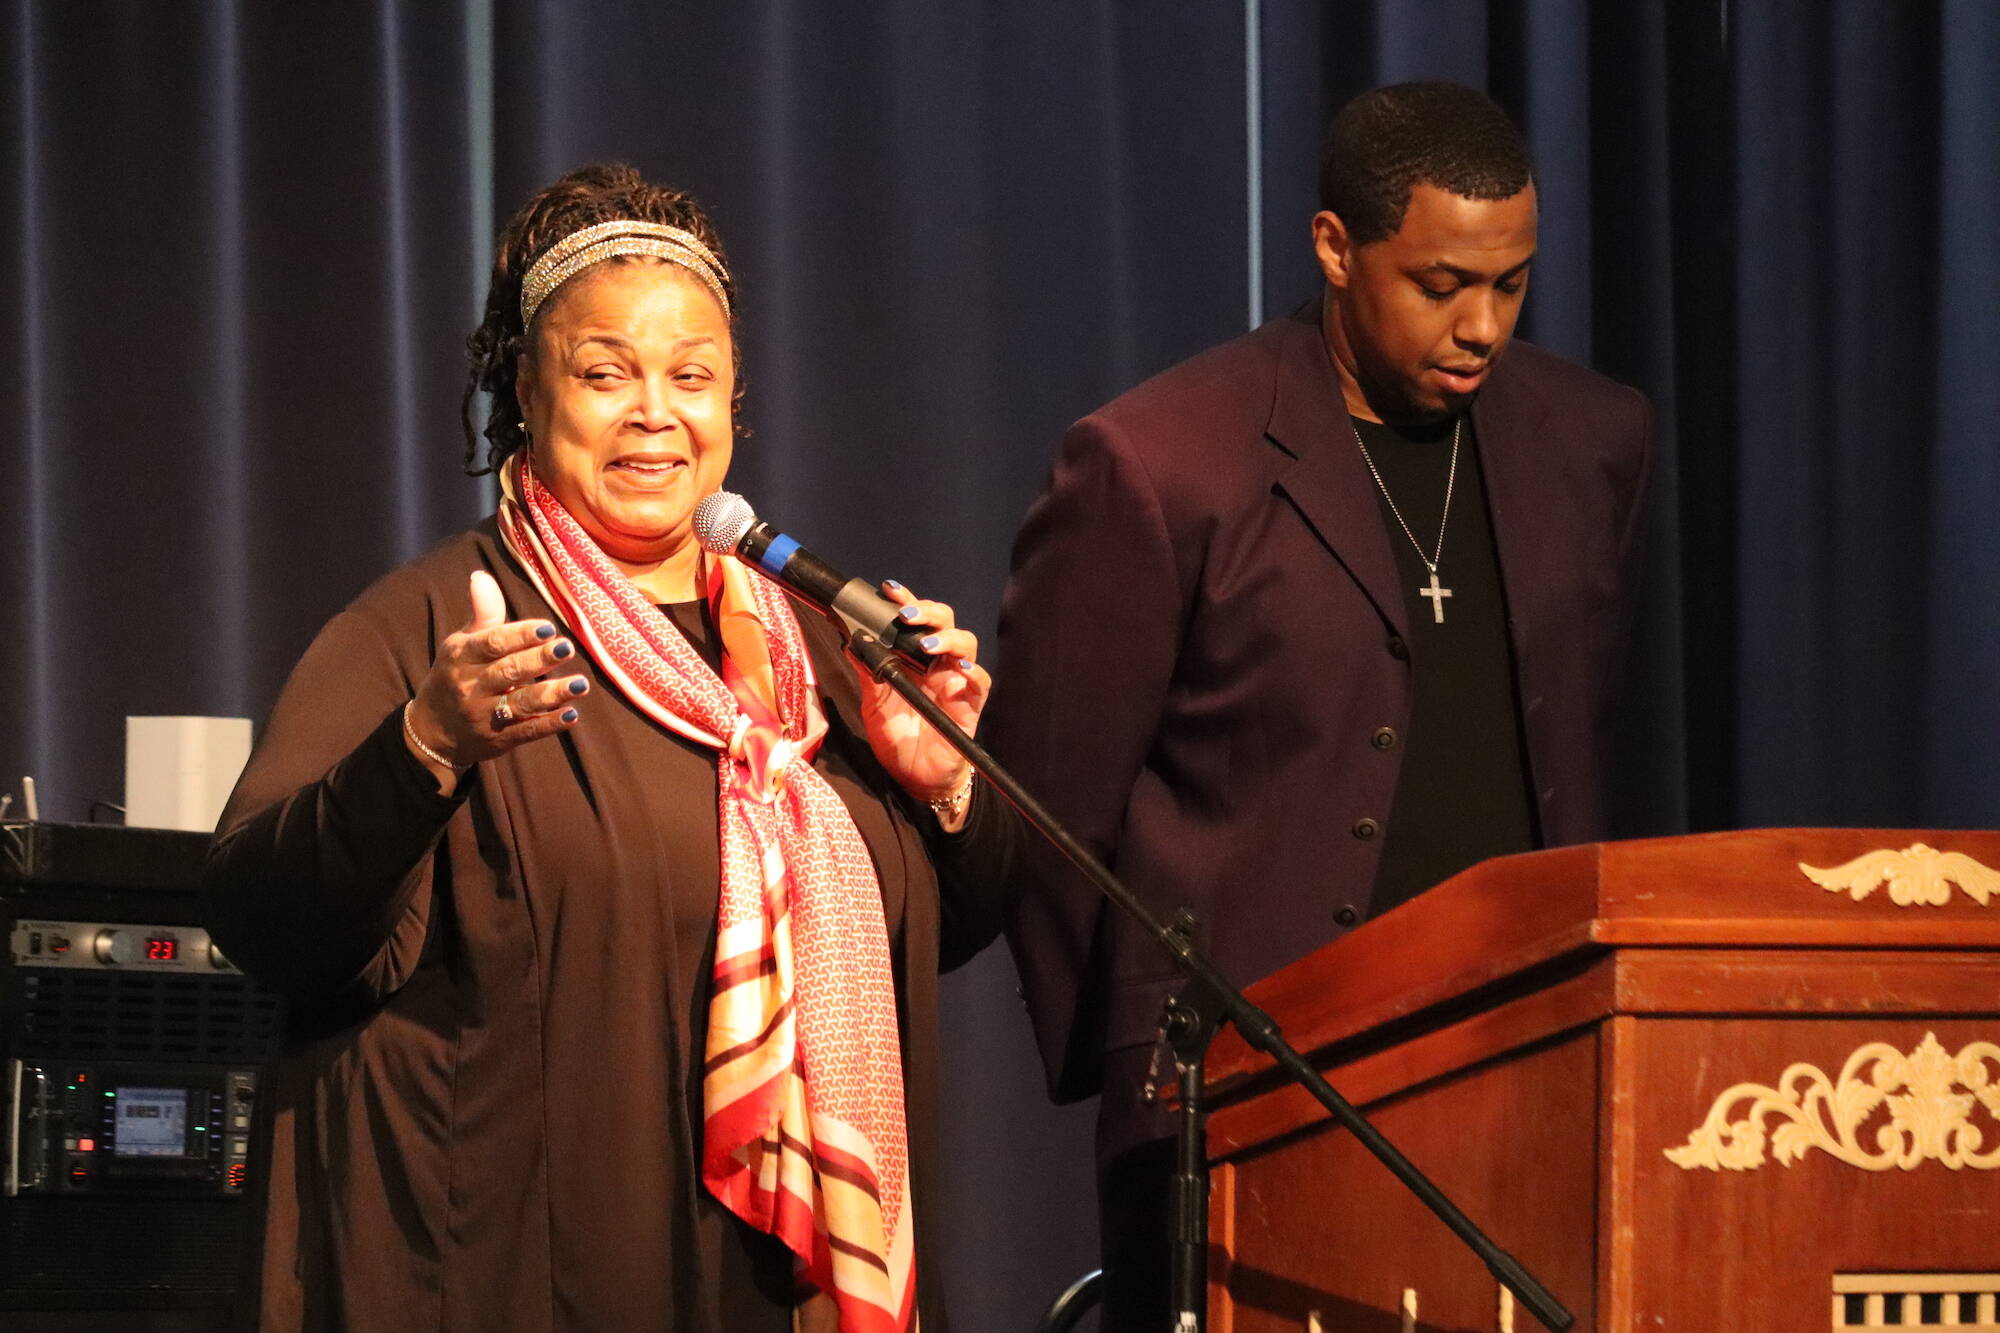 Black Awareness Association president Sherry Patterson and her son and evening’s emcee Michael Patterson address a full crowd after leading a prayer at the Juneau Arts and Culture Center on Saturday during Rise, a Black History Month celebration. (Jonson Kuhn / Juneau Empire)